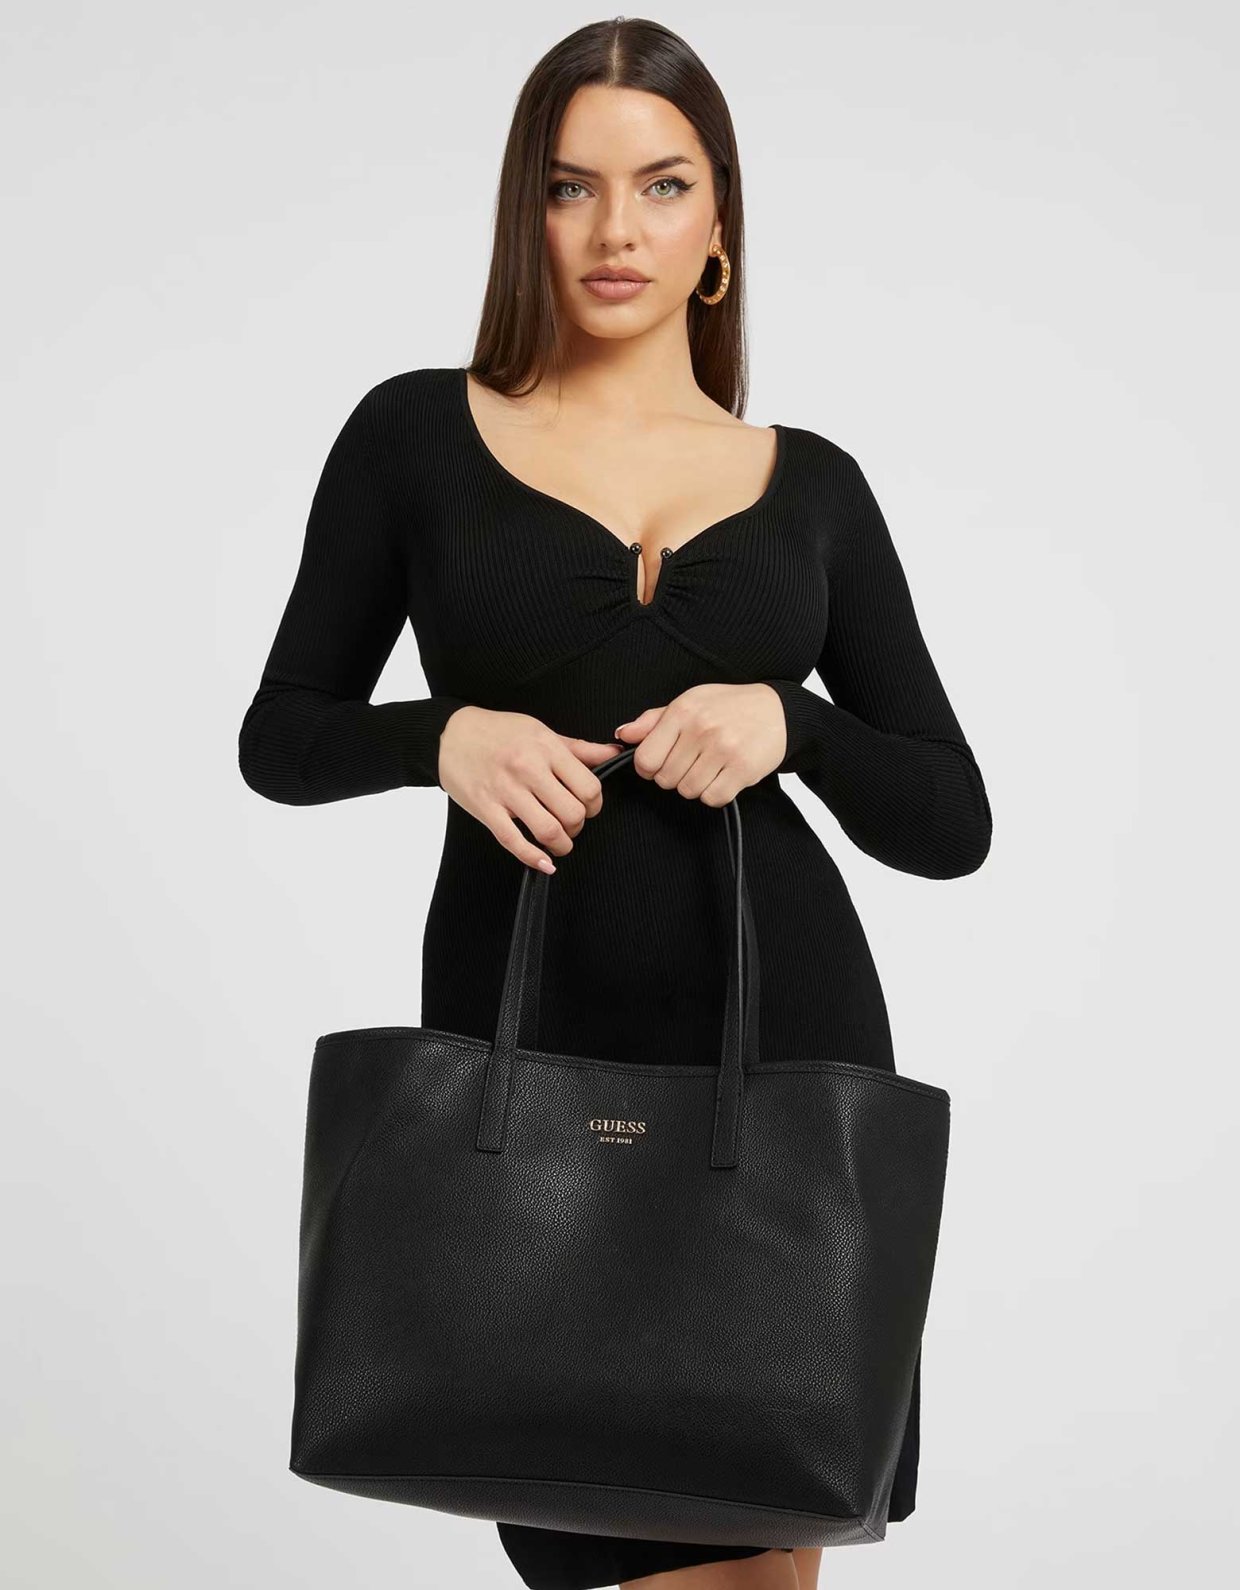 Guess Vikky Large Tote Bag in Black